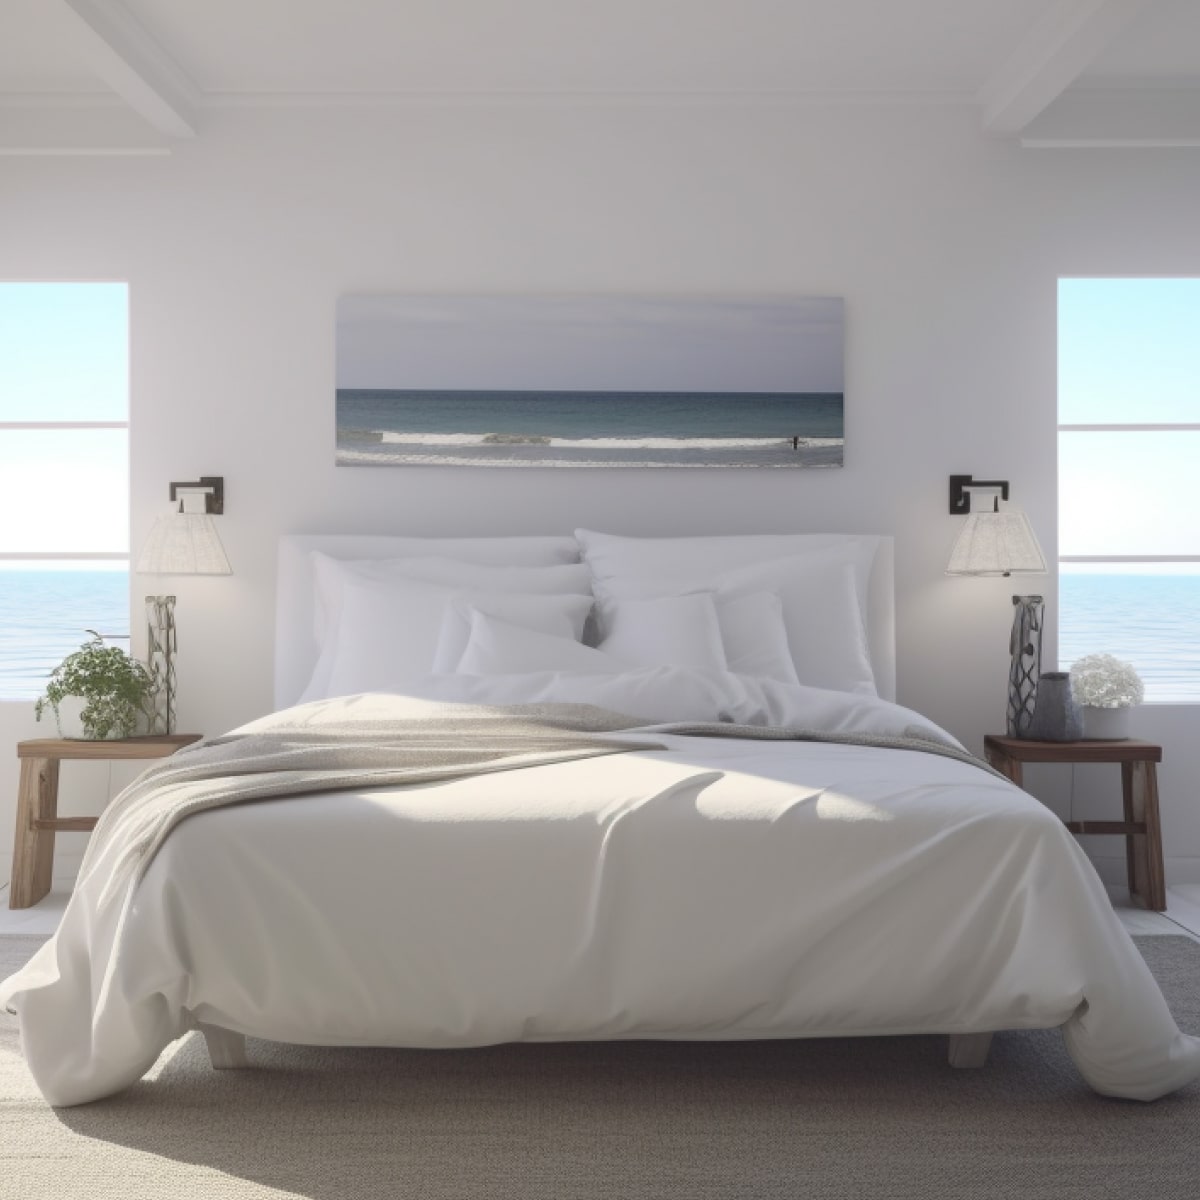 Finding the Perfect Sheets for Your Short-Term Rental: A Comprehensive Guide